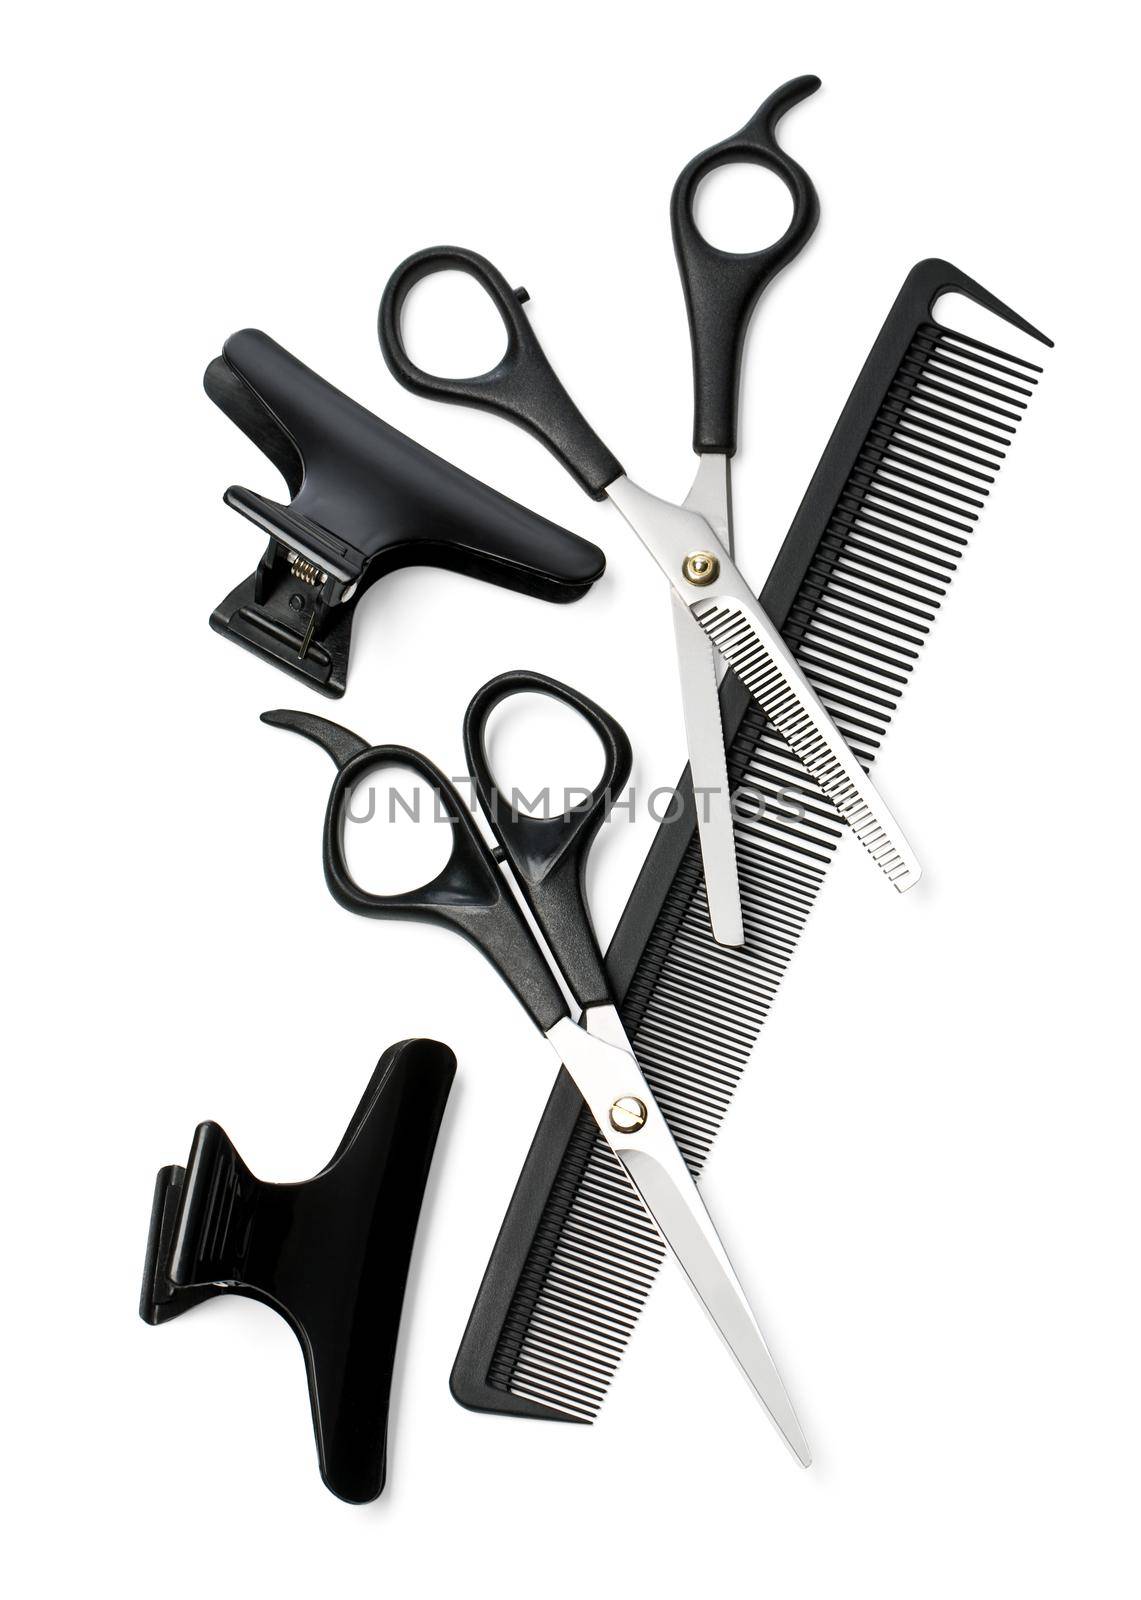 Scissors, Thinning shear on white background. With clipping path